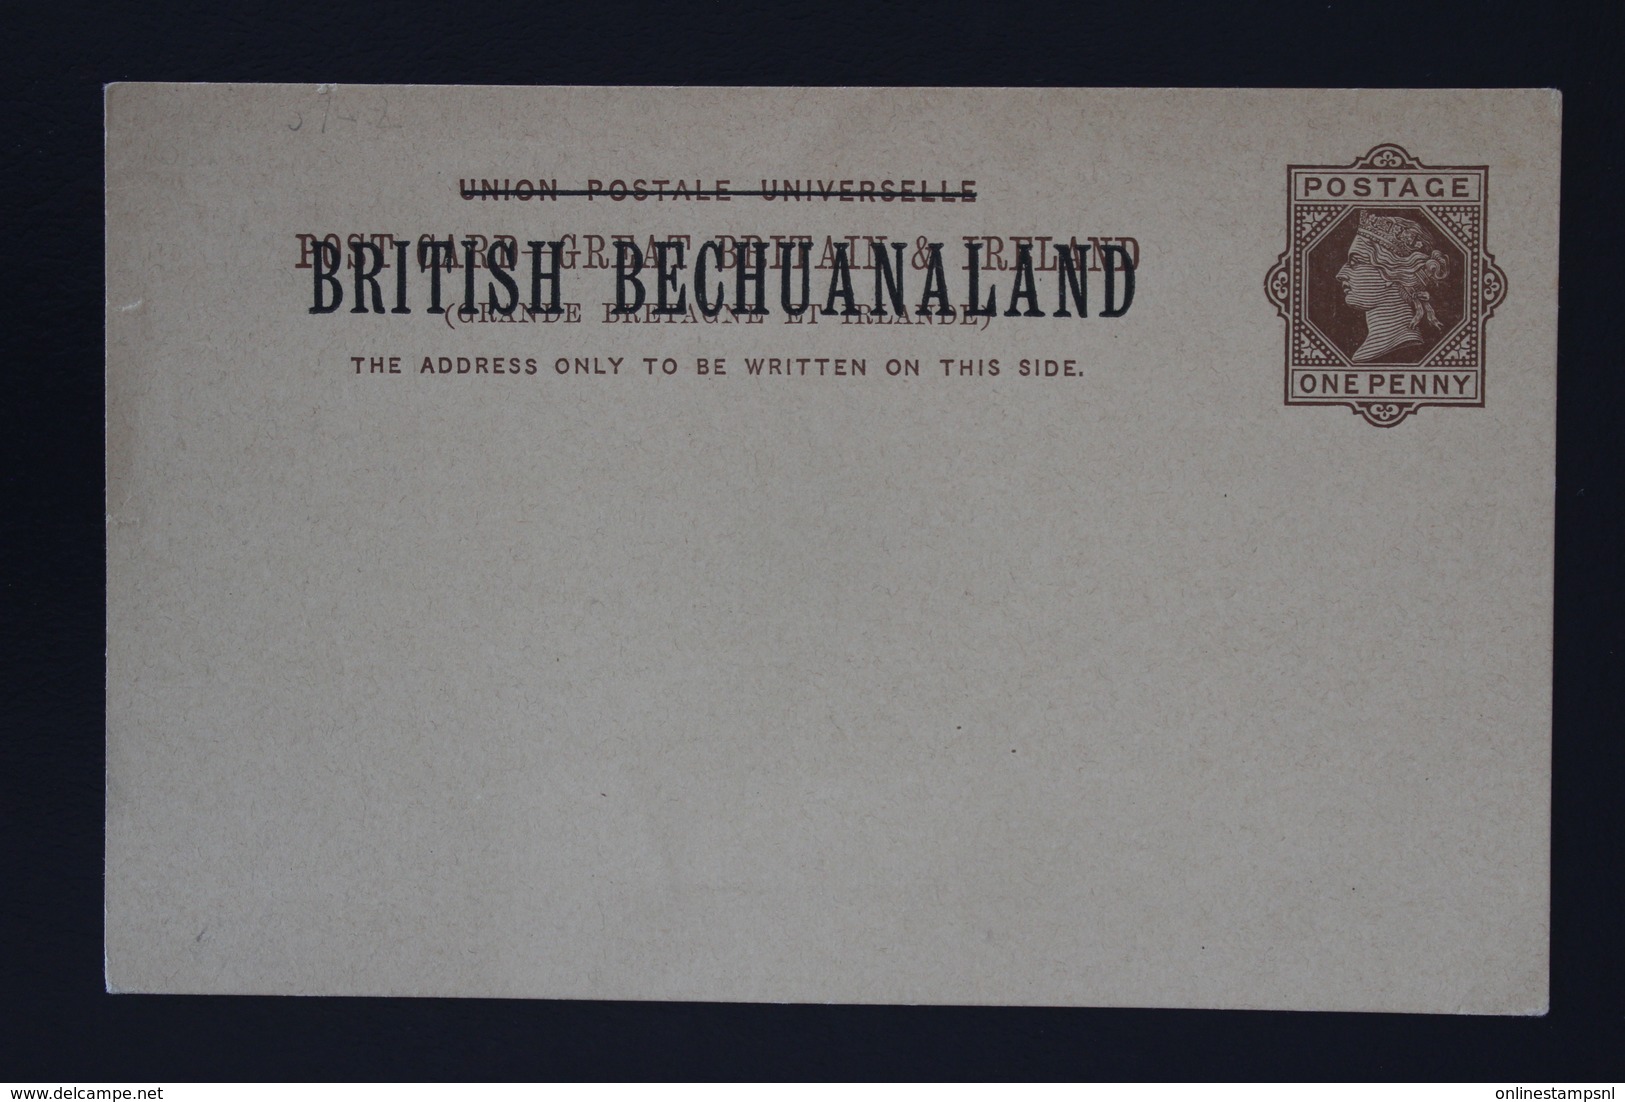 BRITISH BECHUANALAND  Postcard Used + Unused HG P4 1894 Cancel 555 Vryburg + CDS -> Cape Town - 1885-1895 Colonia Británica